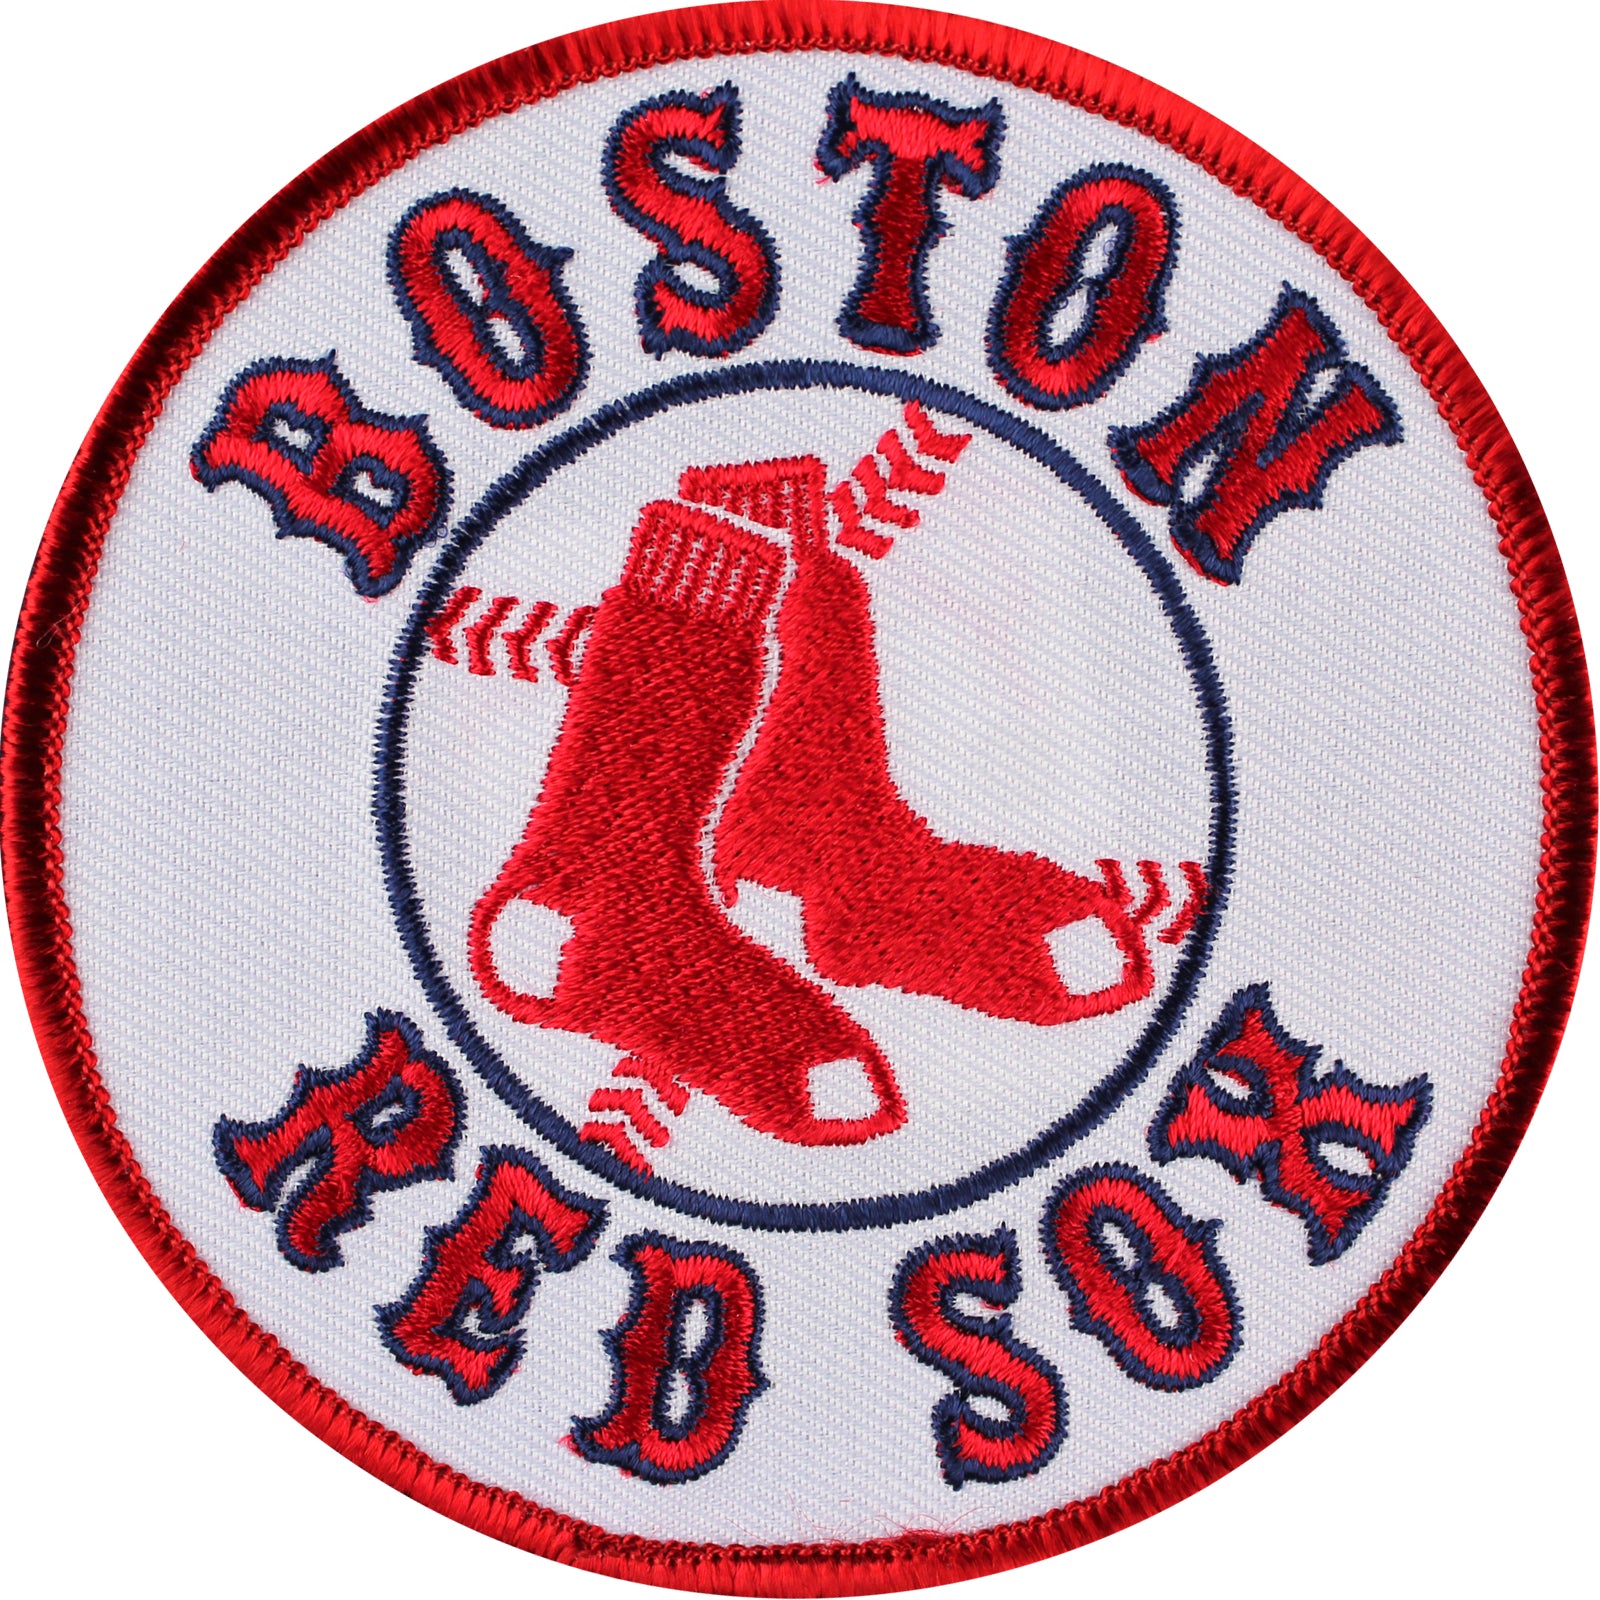 Boston Red Sox Secondary Logo Patch